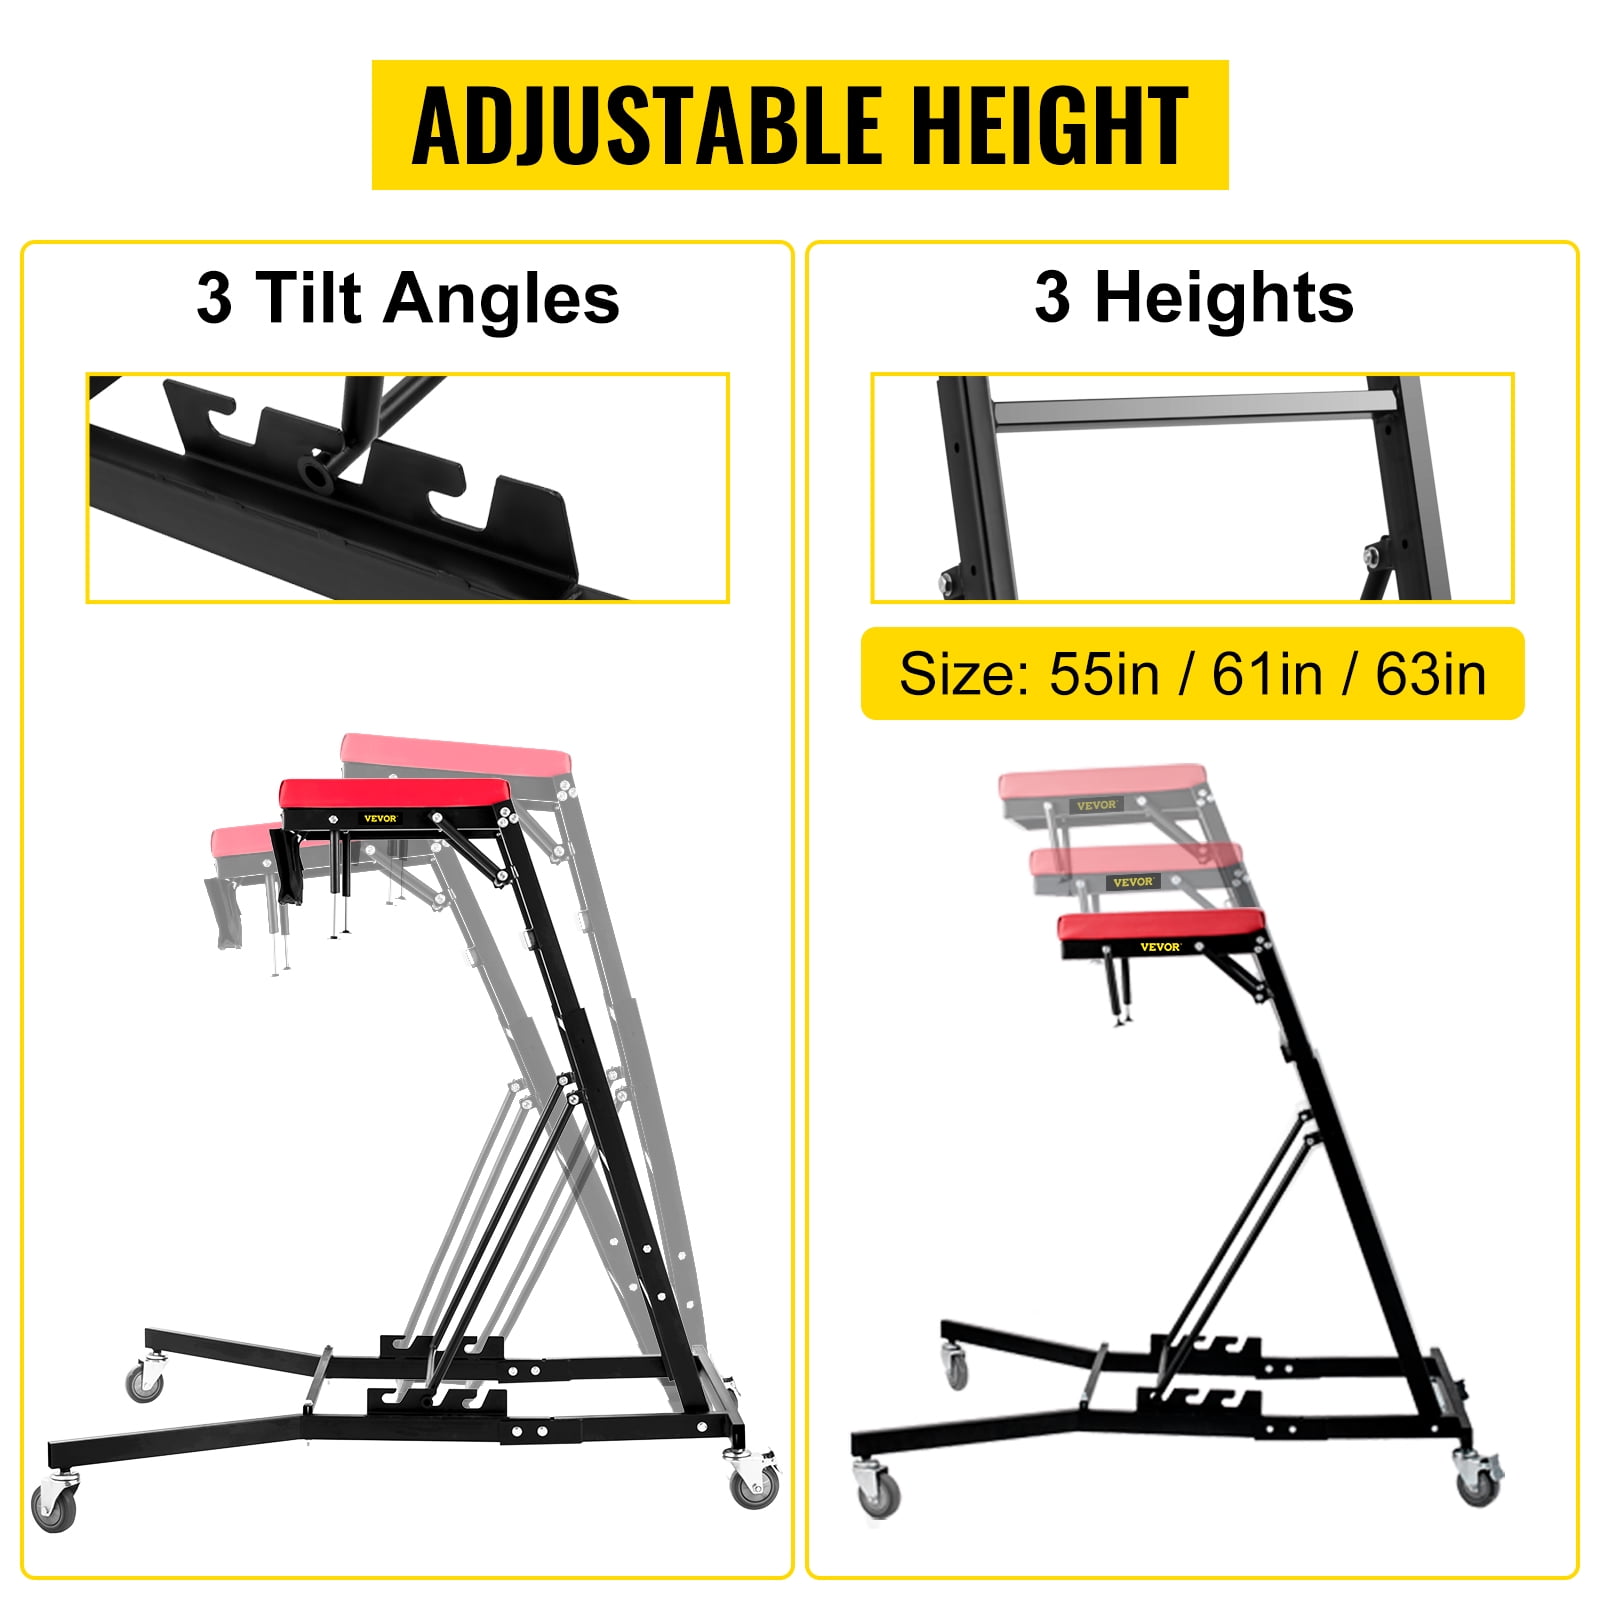 Z/C Collapsible High Top Creeper Mechanics Top Side Creeper,Adjustable Height Capacity 200 KG with Caster 